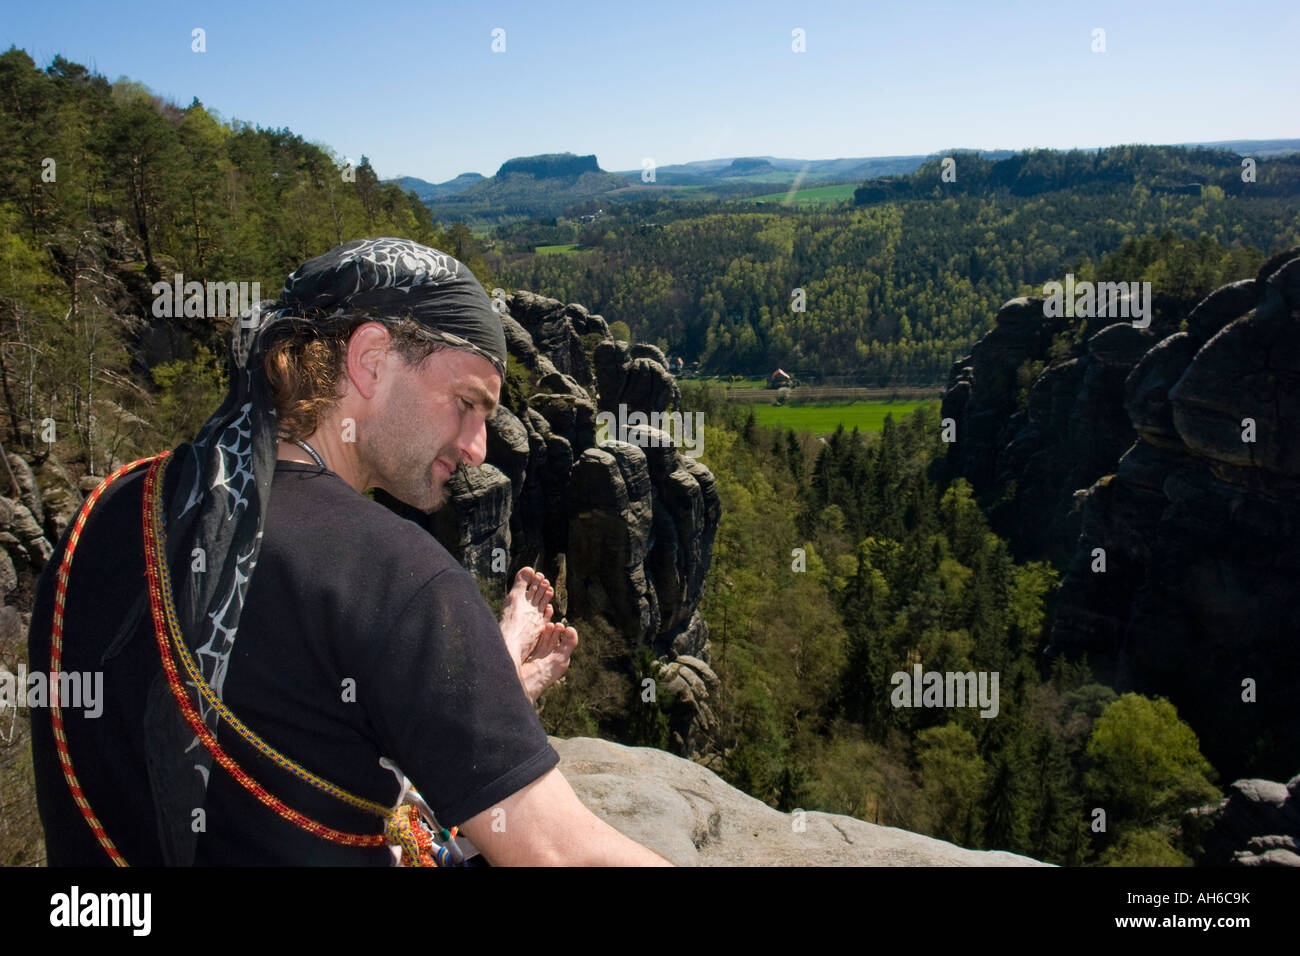 Freeclimber sitting on summit after successful climb Hirschgrund Elbe Sandstone Mountains Germany Stock Photo